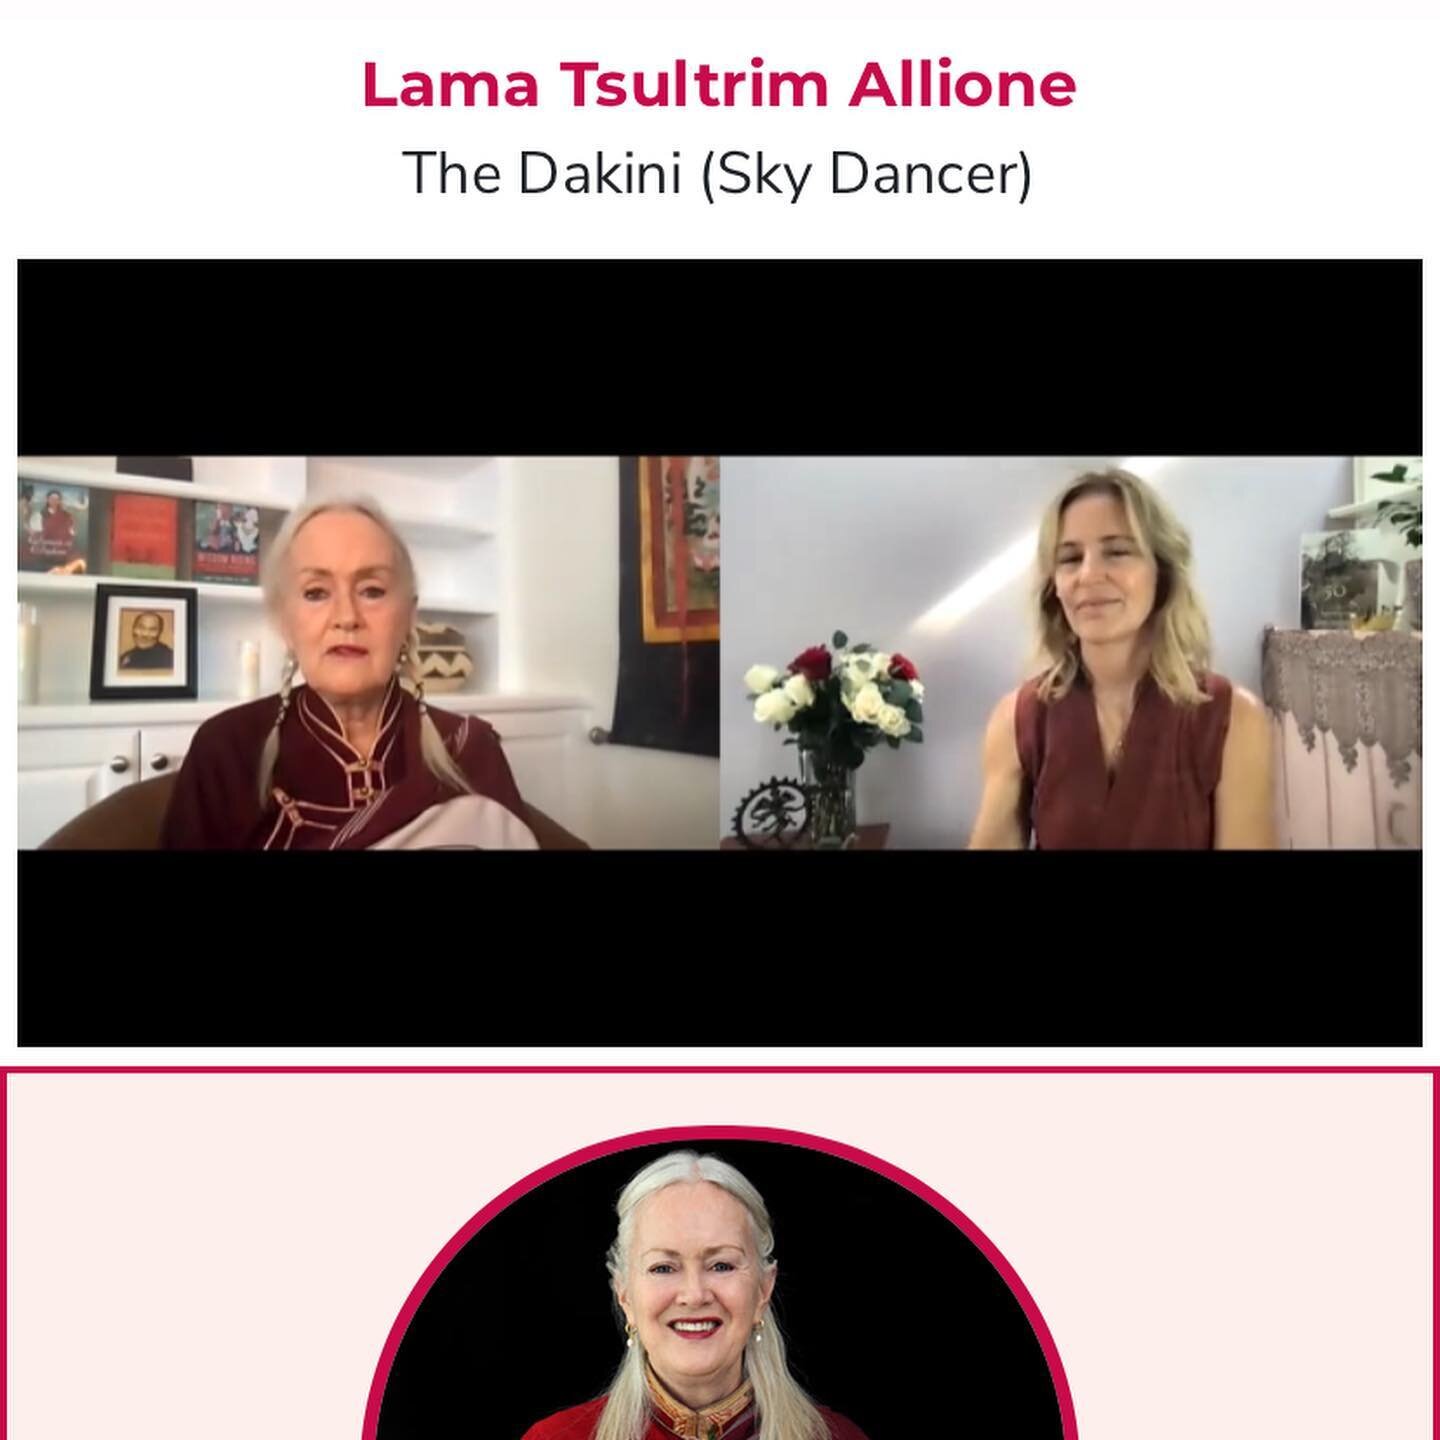 SYNCHRONICITY// so 2 days after my previous post about the card and message I pulled on IG, the woman I was quoting shows up for me to listen to @evolvingsisters Divine Feminine Summit

👑👑👑
I had never heard of this Tantric Lama before that day an